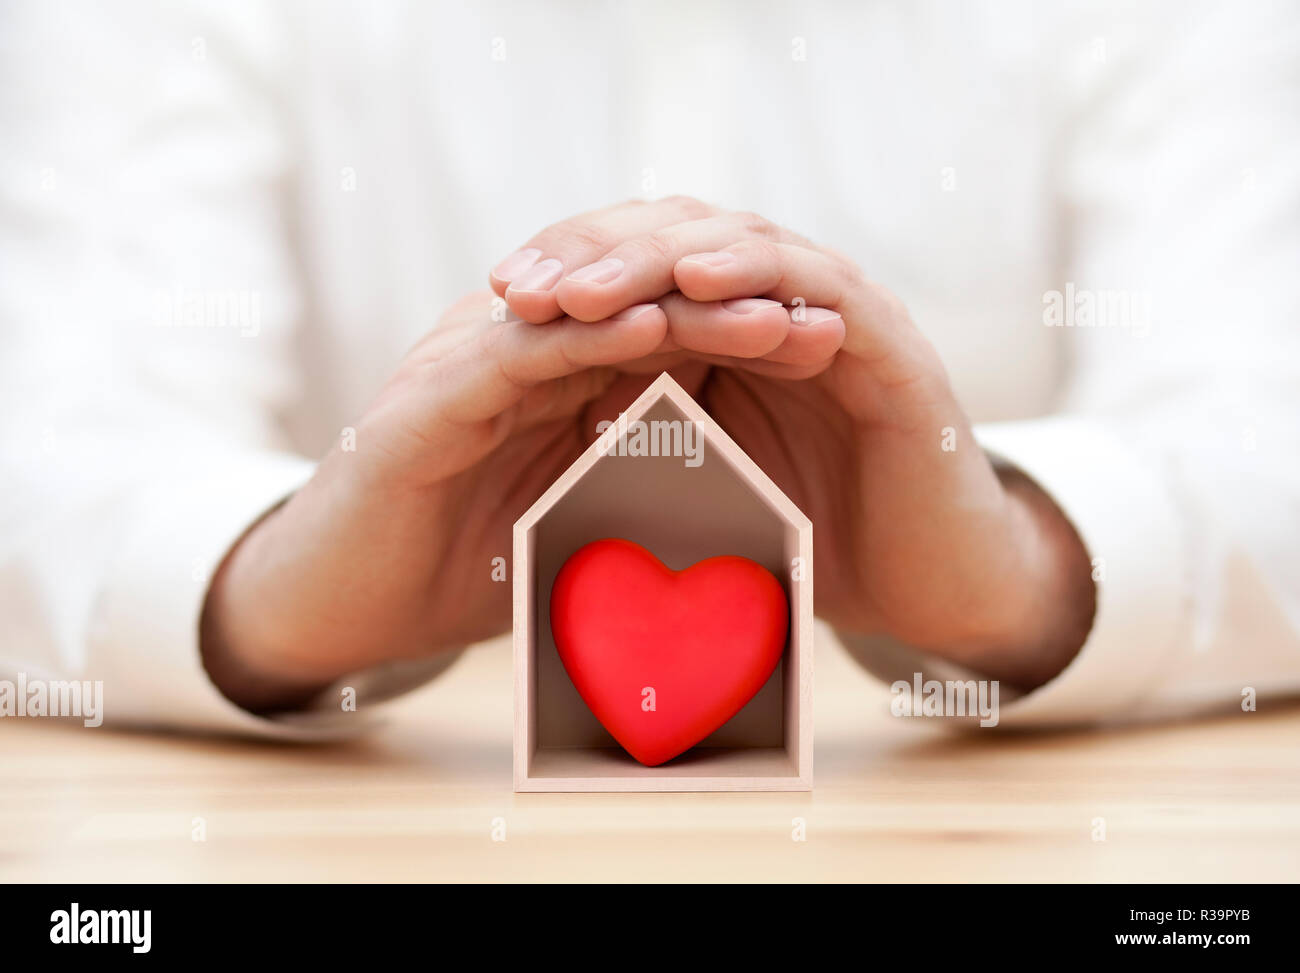 Wooden house with red heart protected by hands Stock Photo